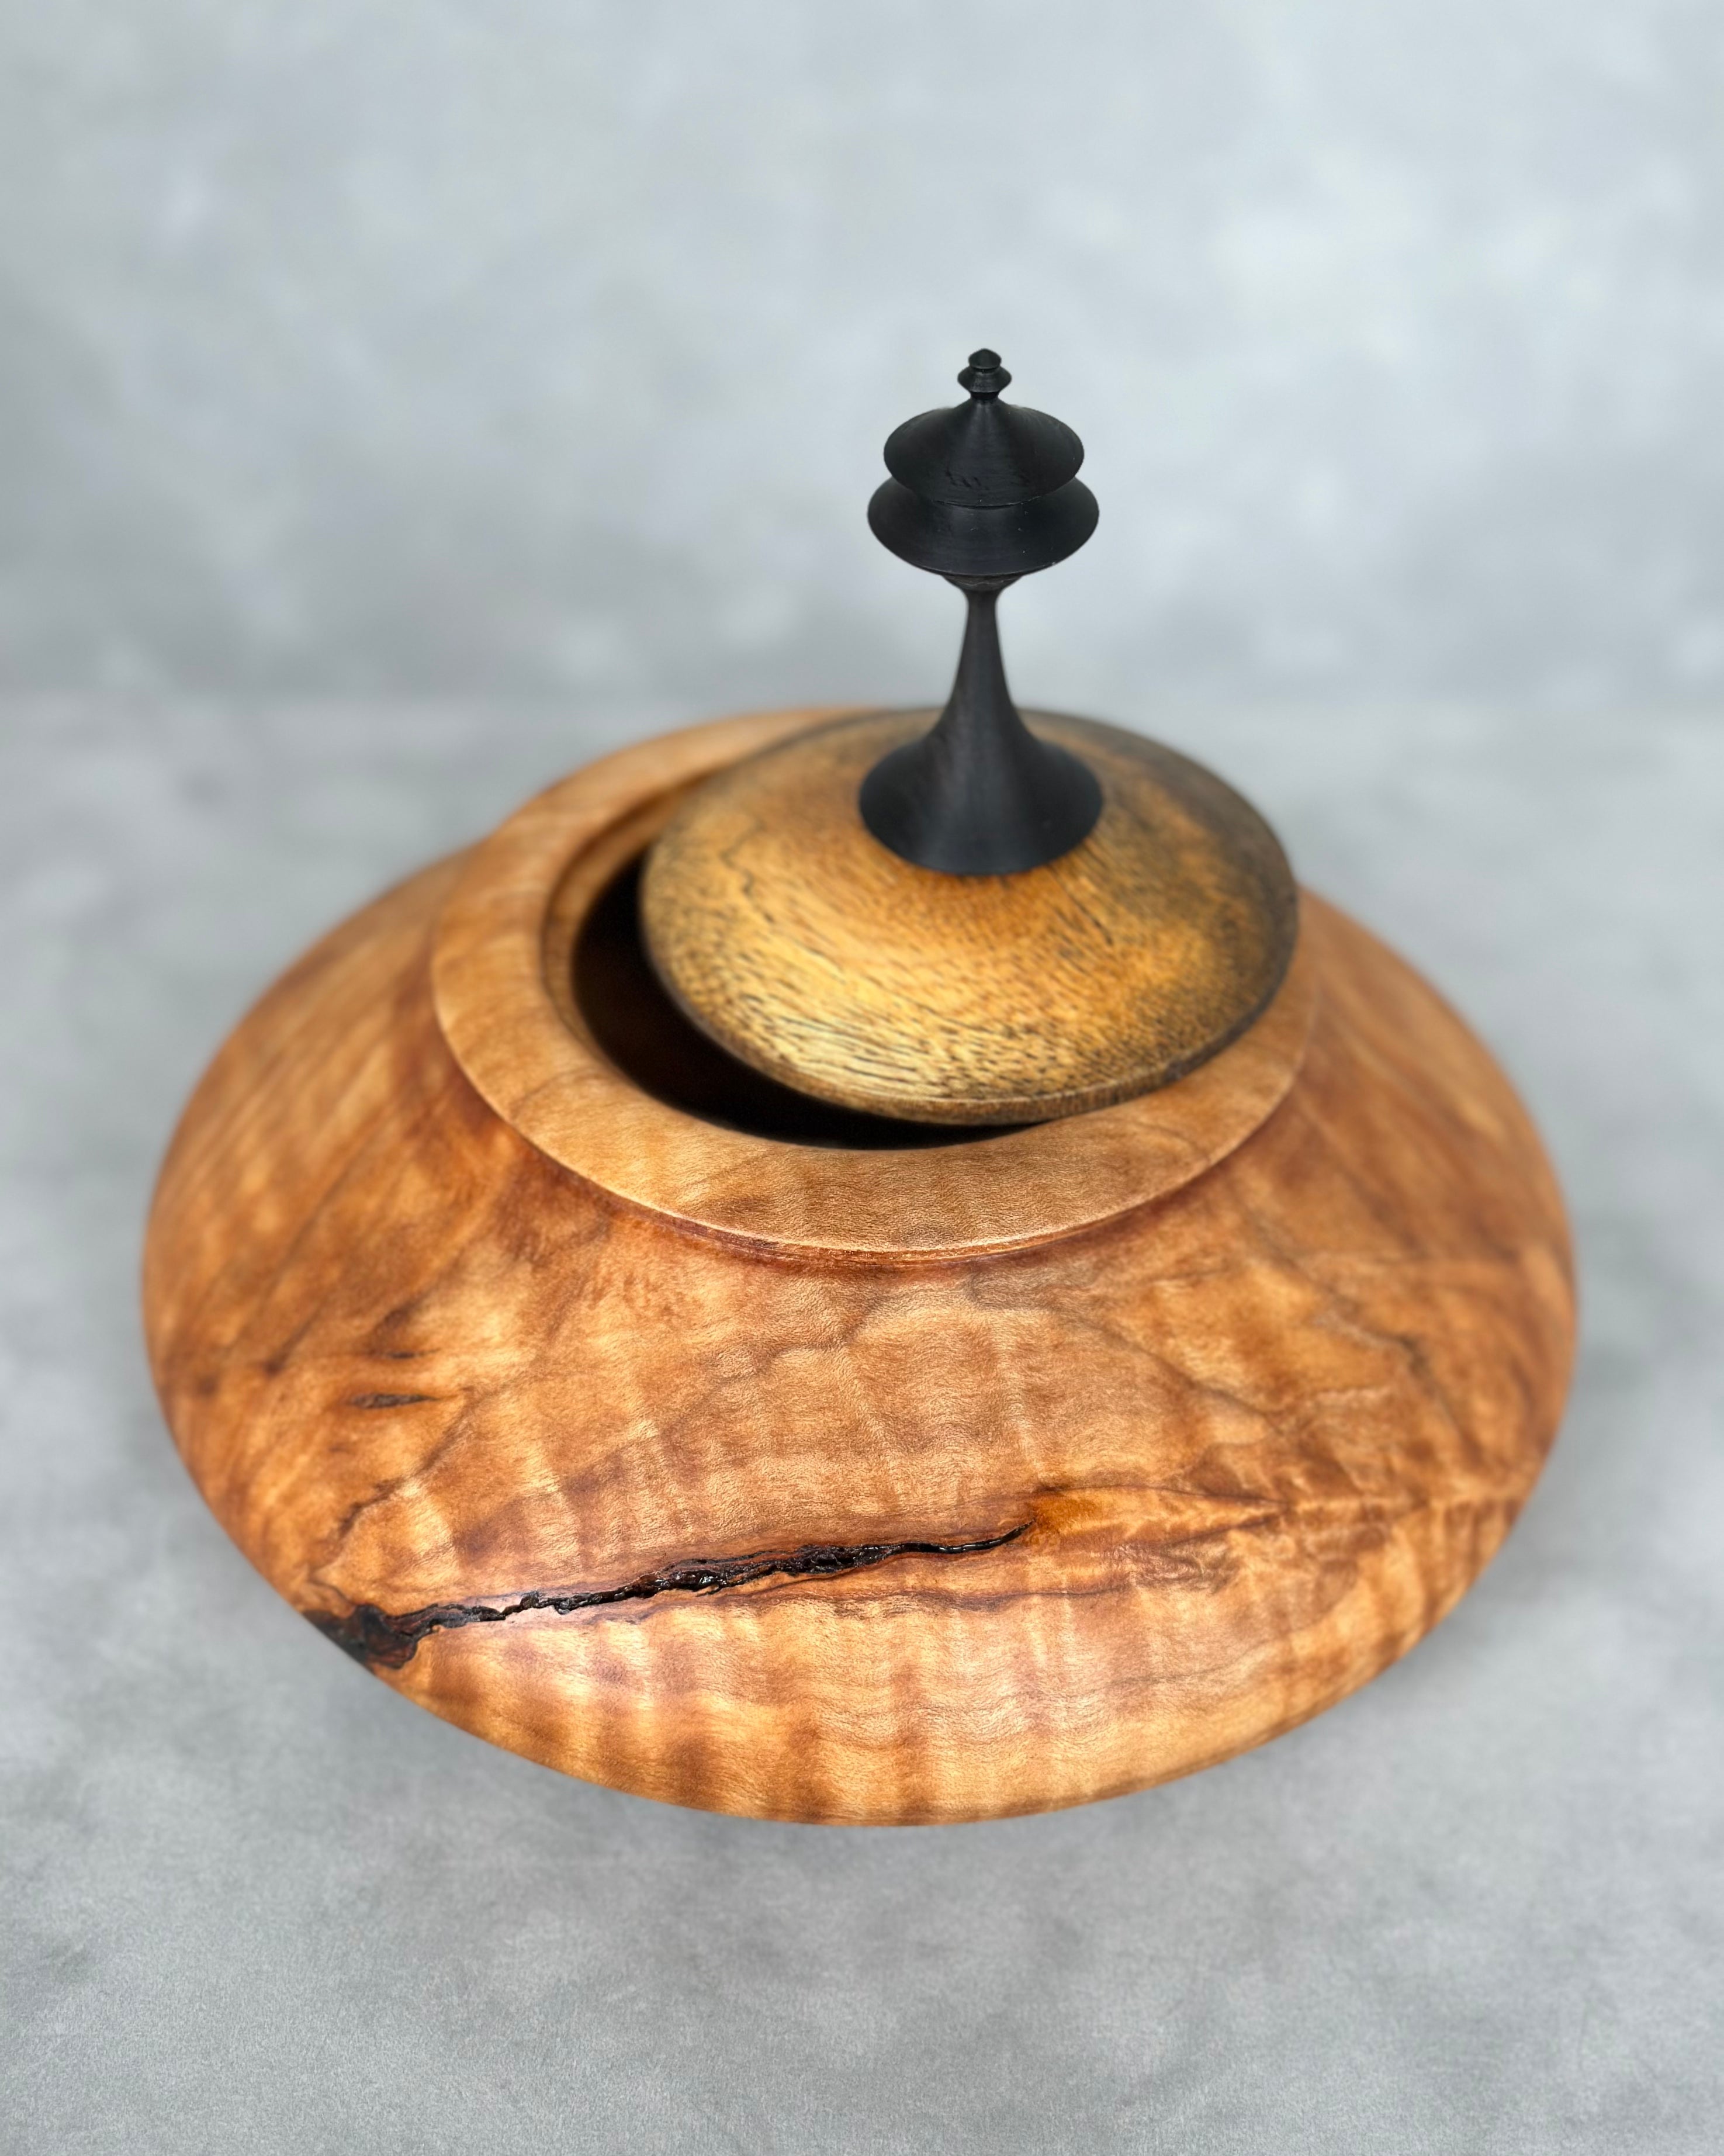 Figured Maple Hollow Form with African Blackwood Lid and Finial